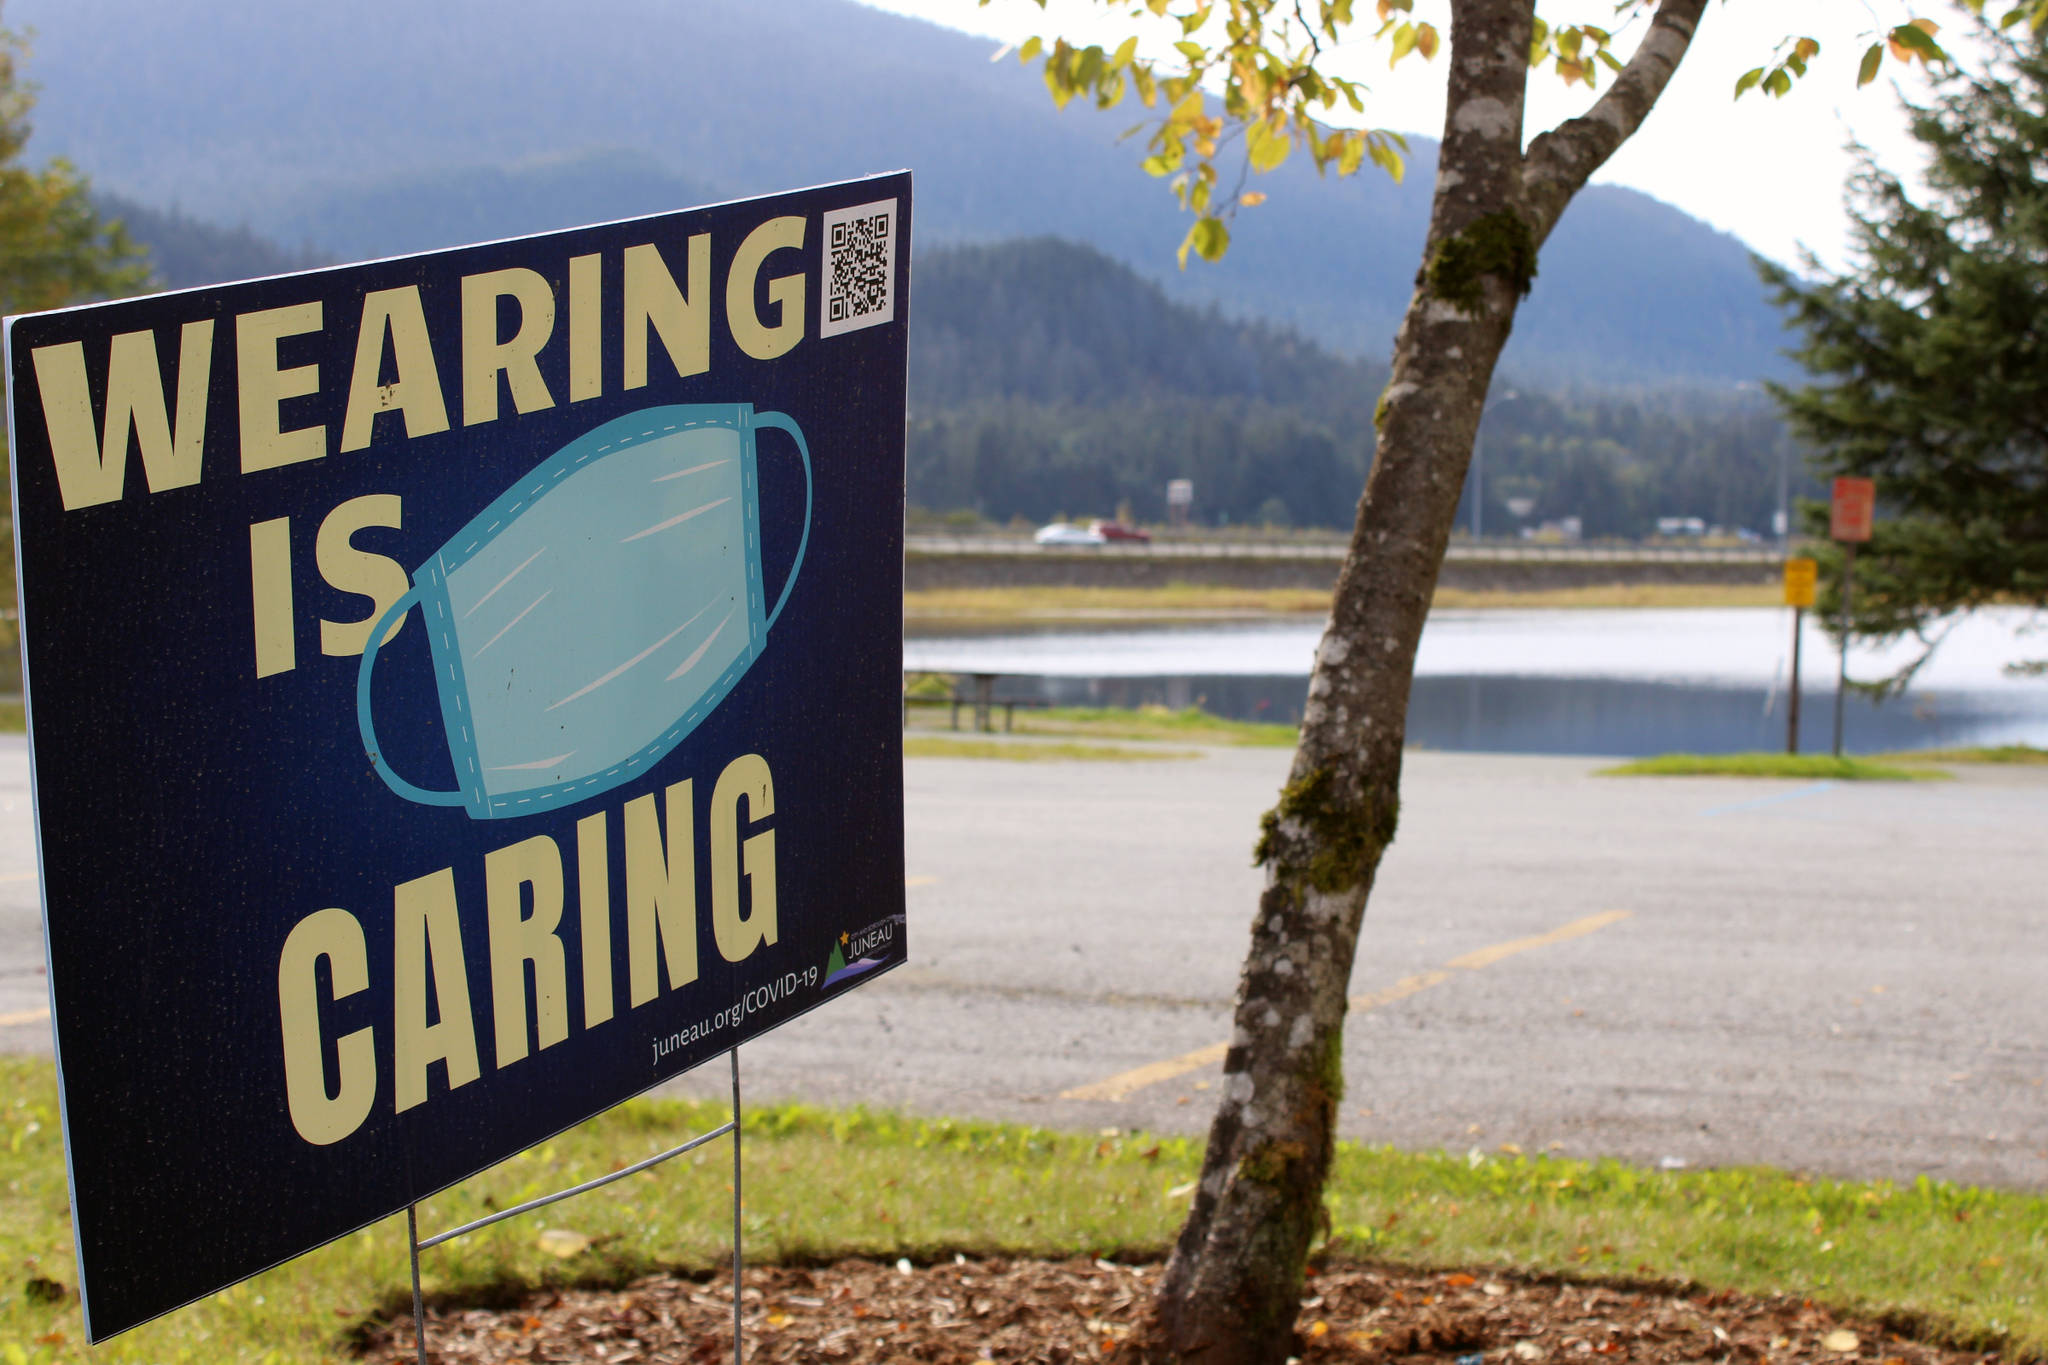 A sign seen near Twin Lakes on Sept. 17, 2020 encourages residents to wear masks in public settings. With cases surging locally, statewide and nationally, City and Borough of Juneau announced it would be fully implementing mitigation measures. (Ben Hohenstatt / Juneau Empire File)